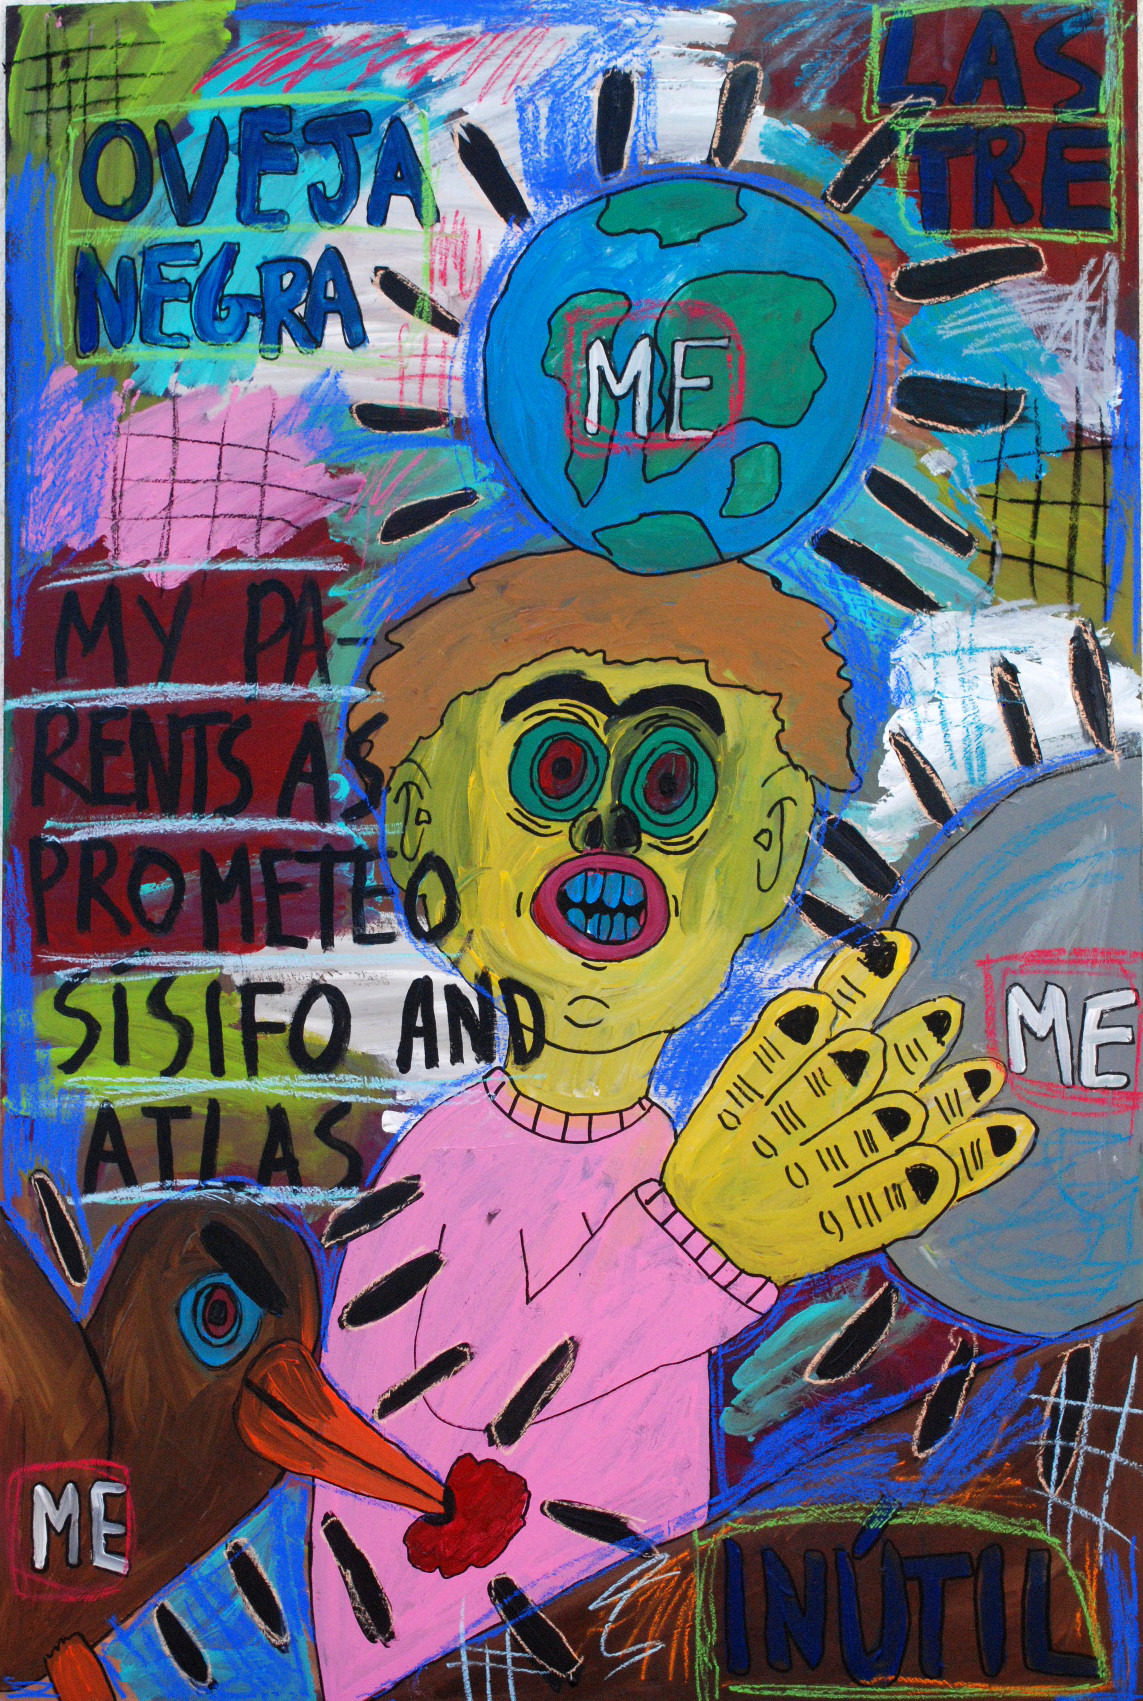    “My parents as Prometeo, Sísifo and Atlas” , 2012   Acrylic paint and pastel on wood, 90 x 130 cm 